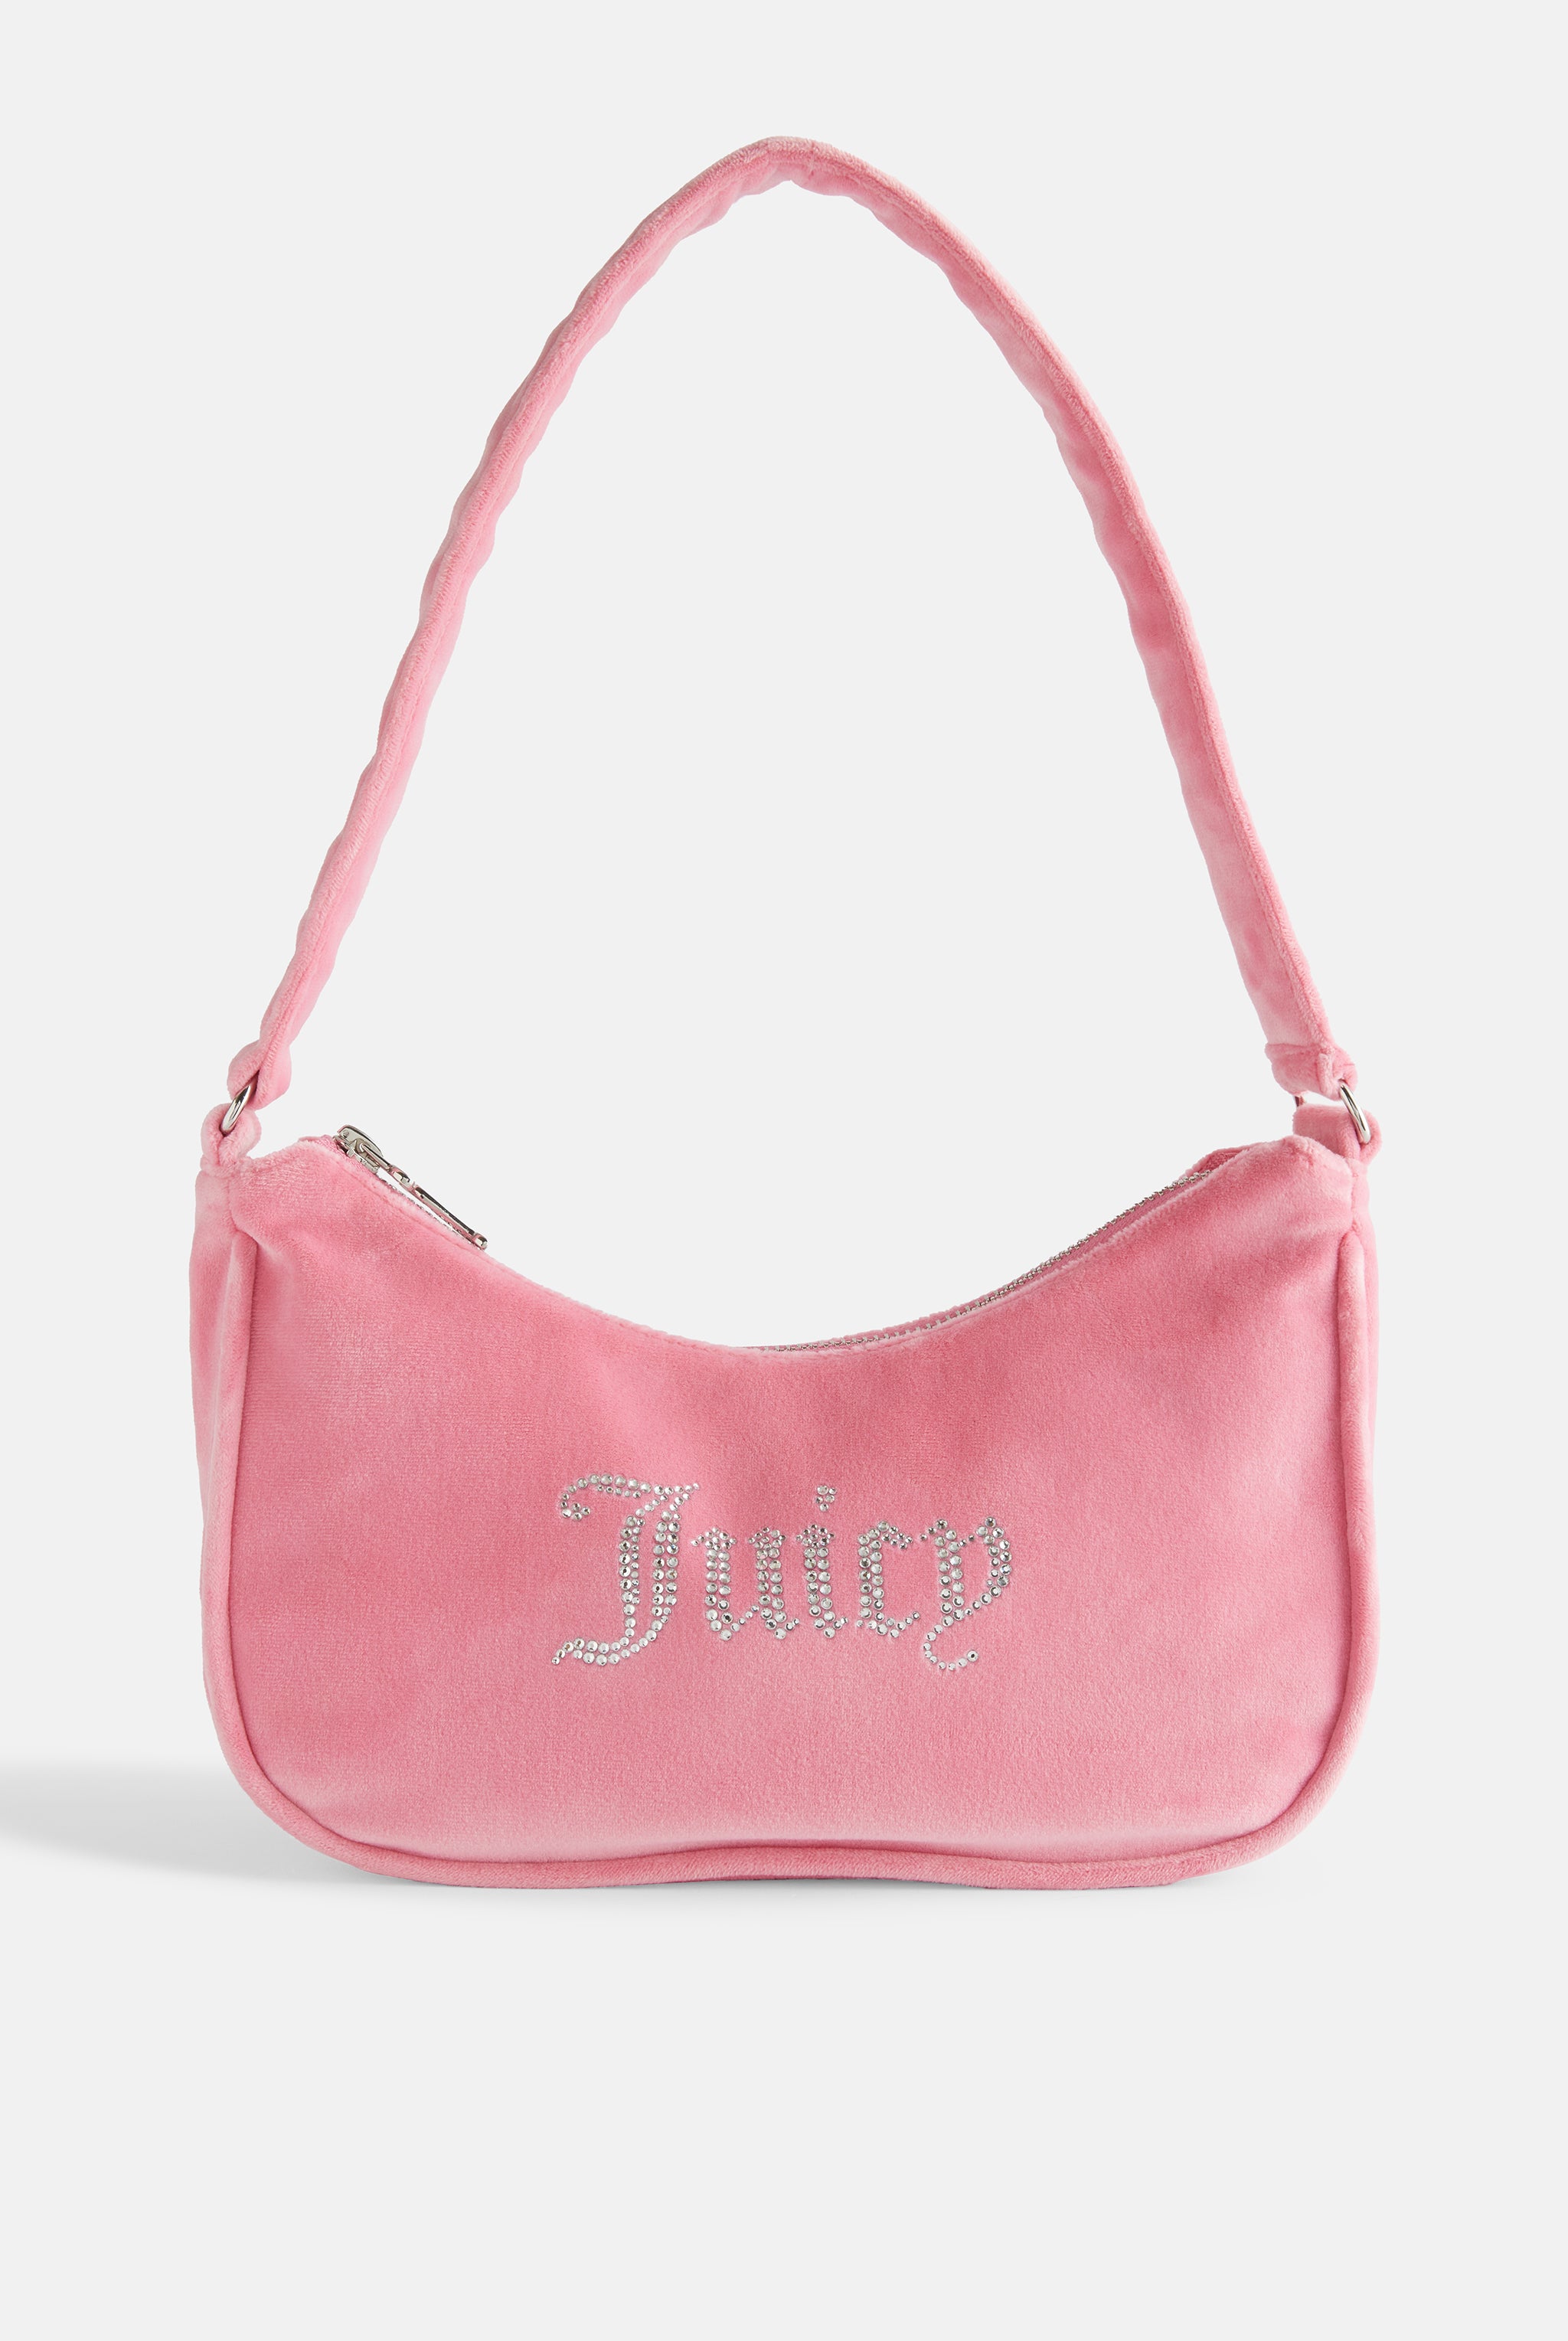 Juicy Couture Made With Love P&J Velour Purse - Bags and purses